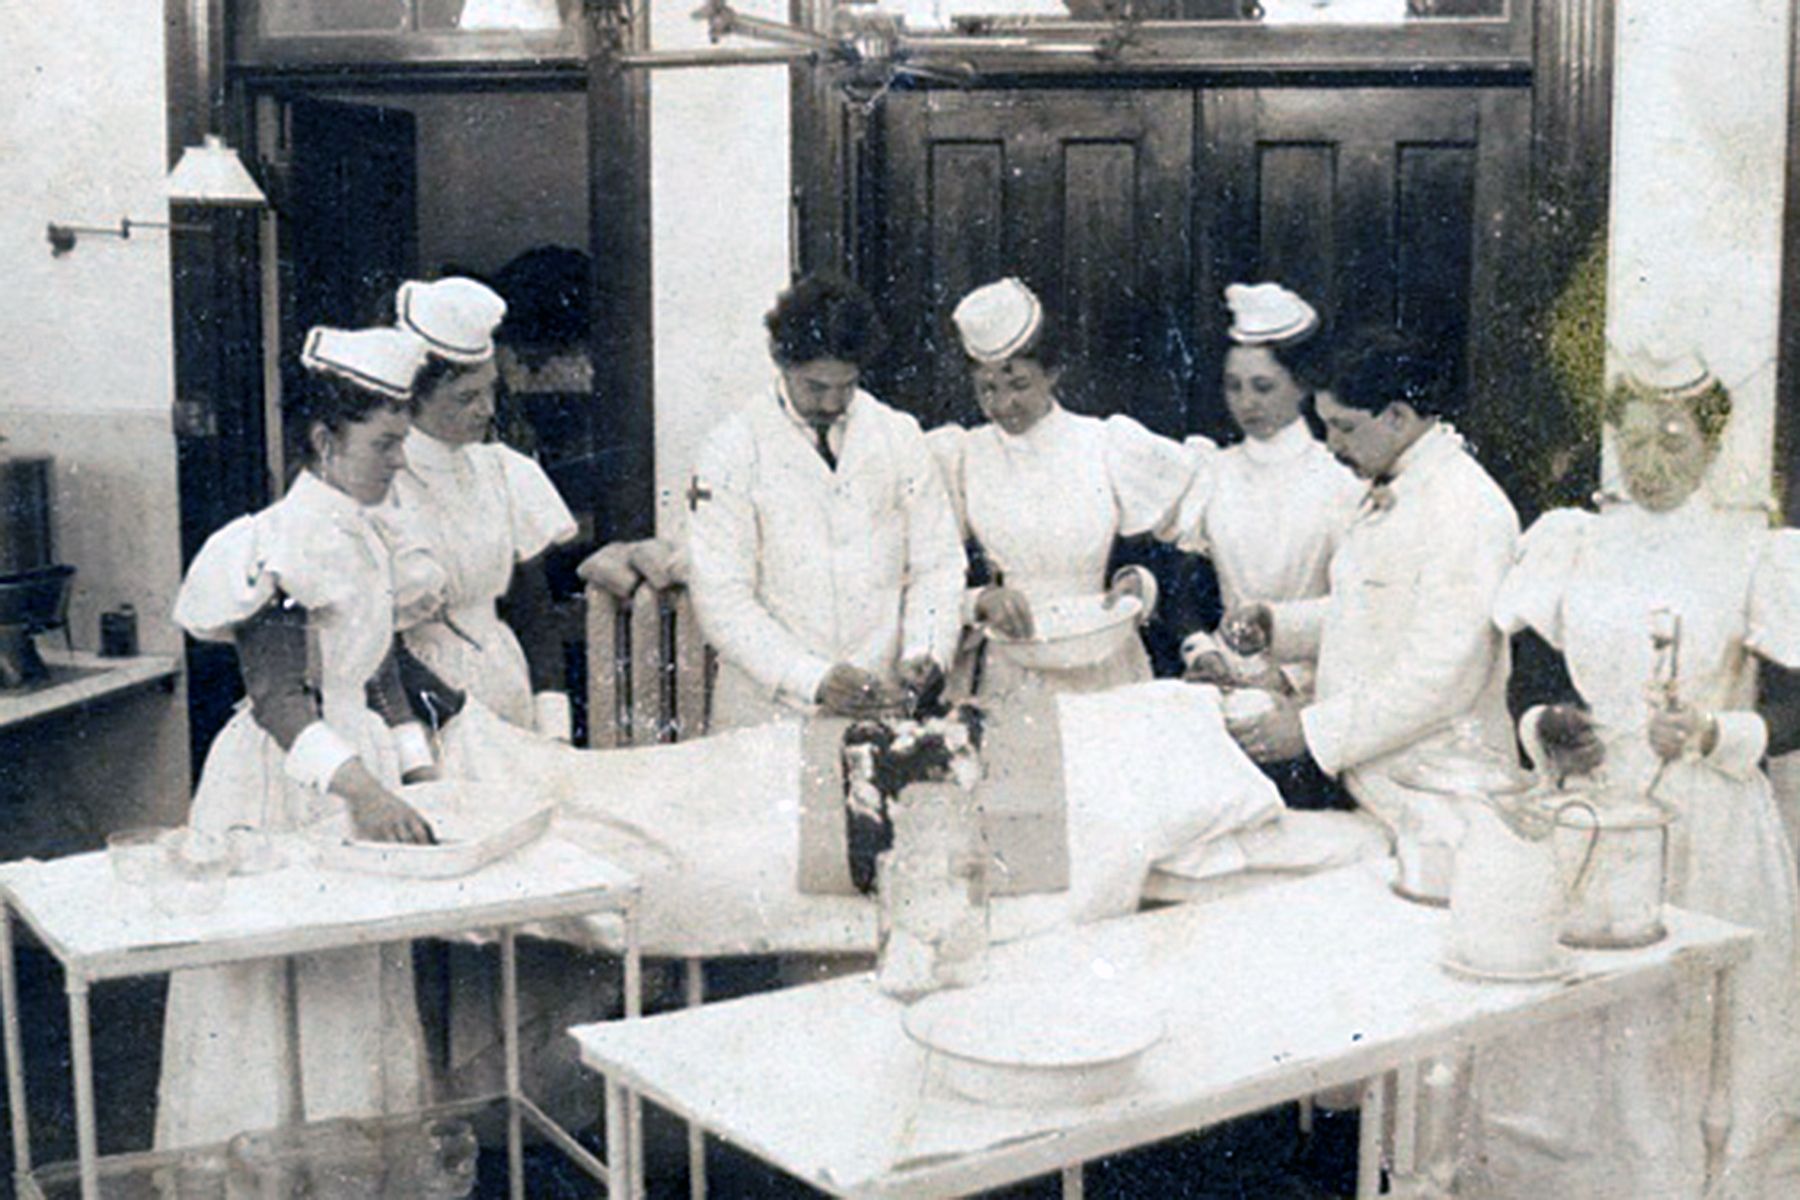 A mock scene of an operation in the Fenwick Operating Theatre. (c. 1896)